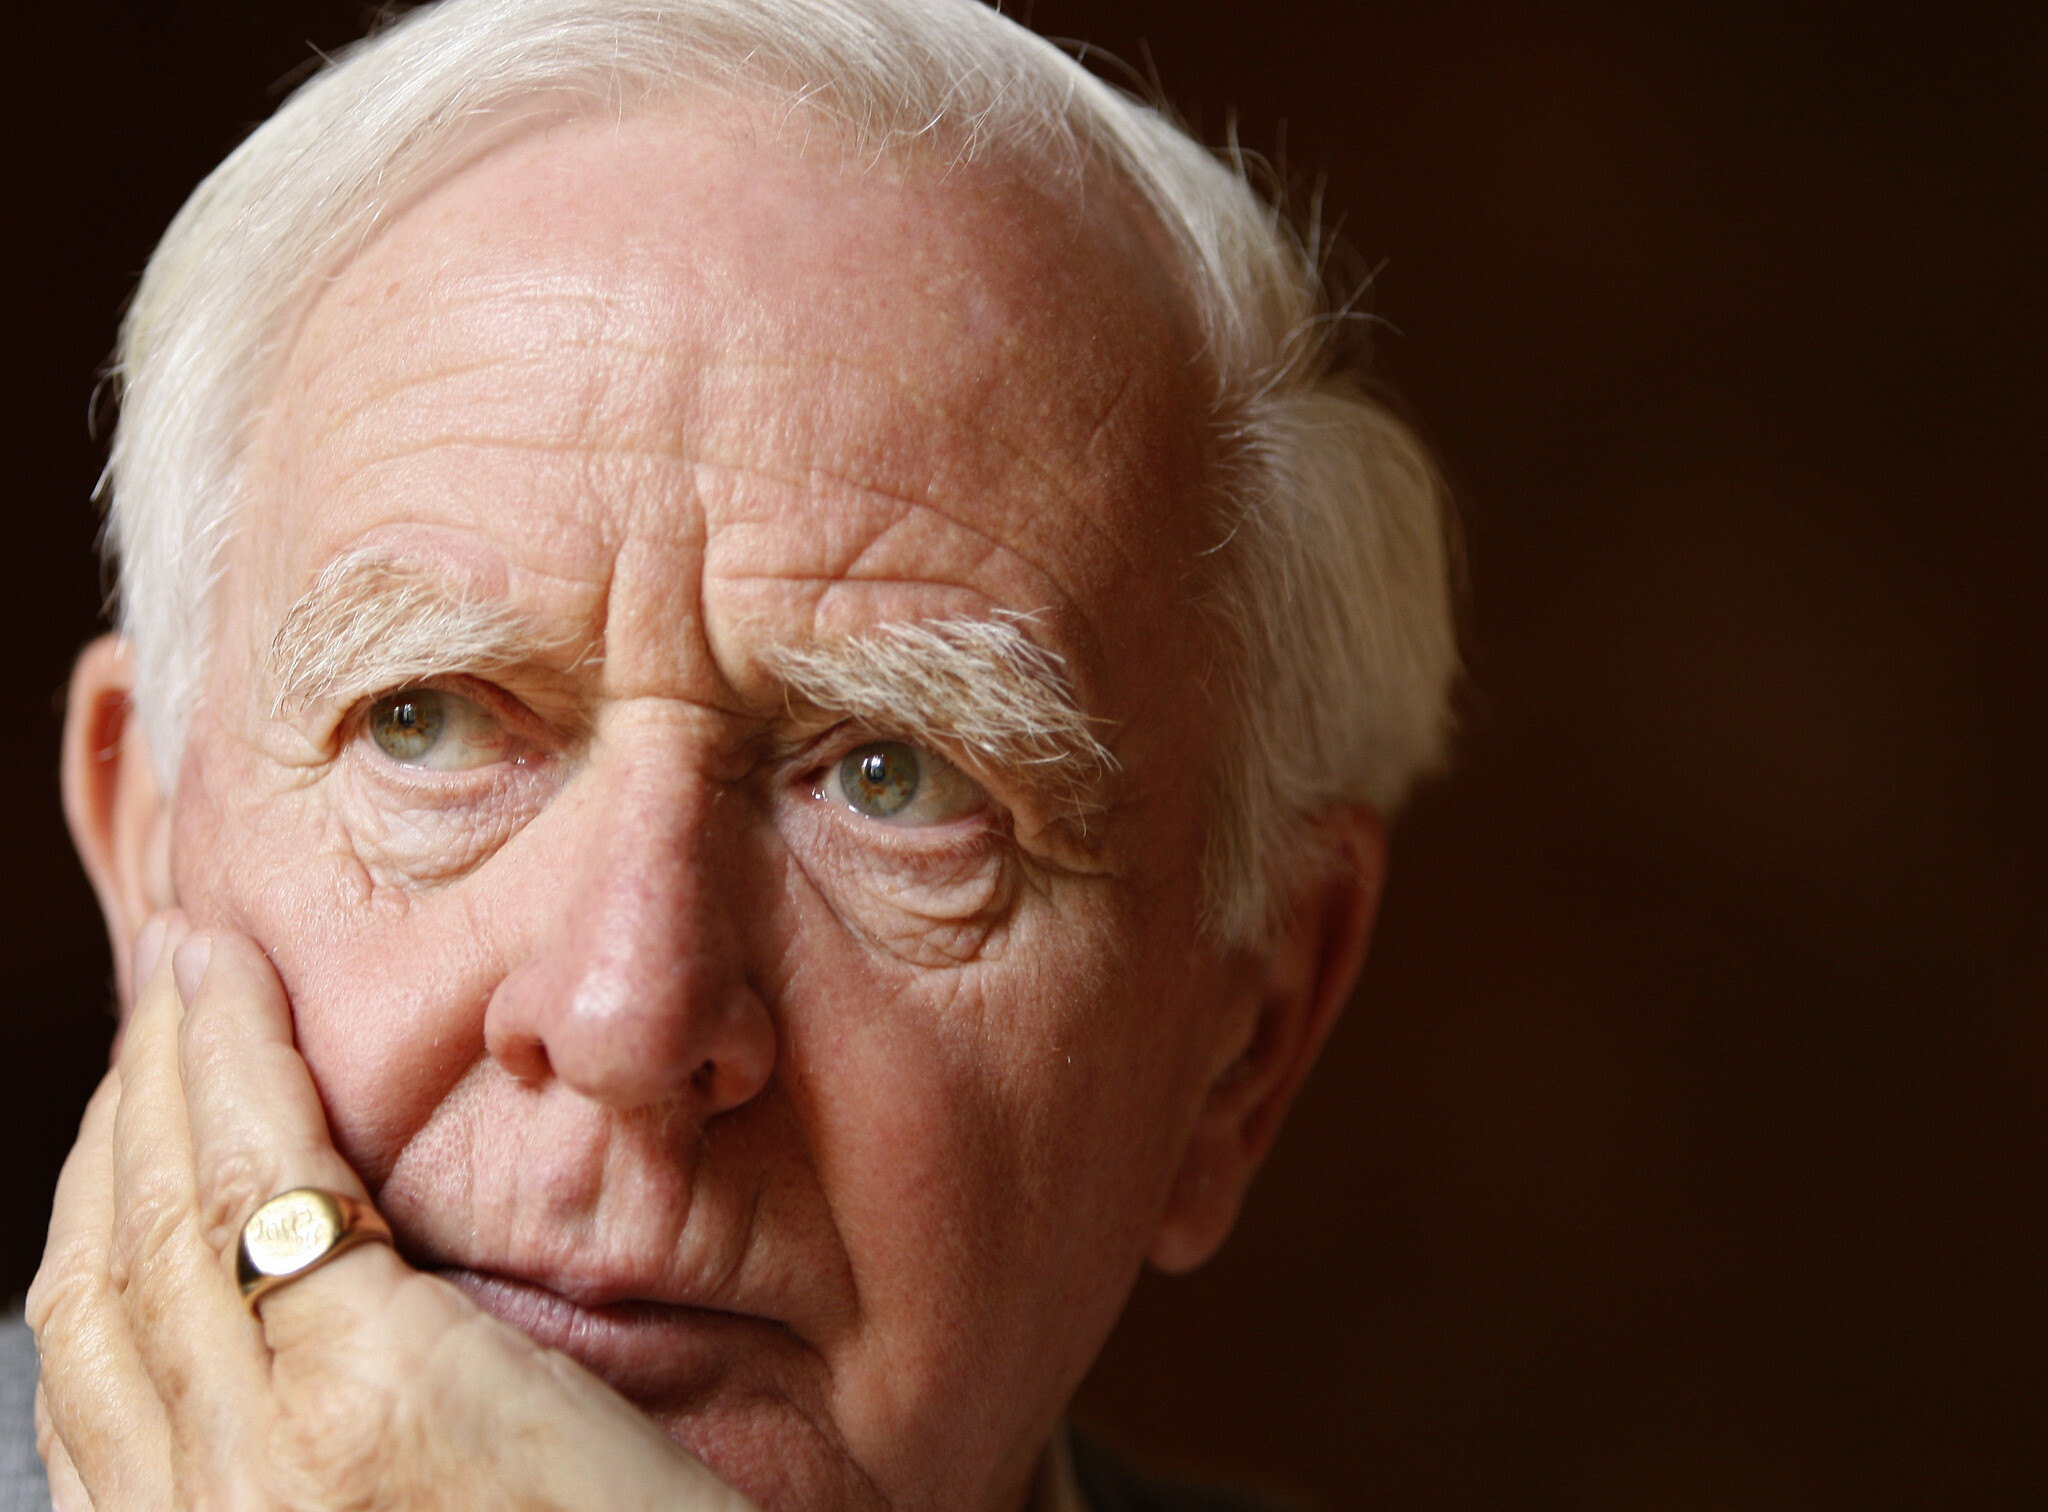 Author John Le Carre, real name David Cornwell at his home in London, Thursday, Aug. 28, 2008. (AP Photo/Kirsty Wigglesworth)